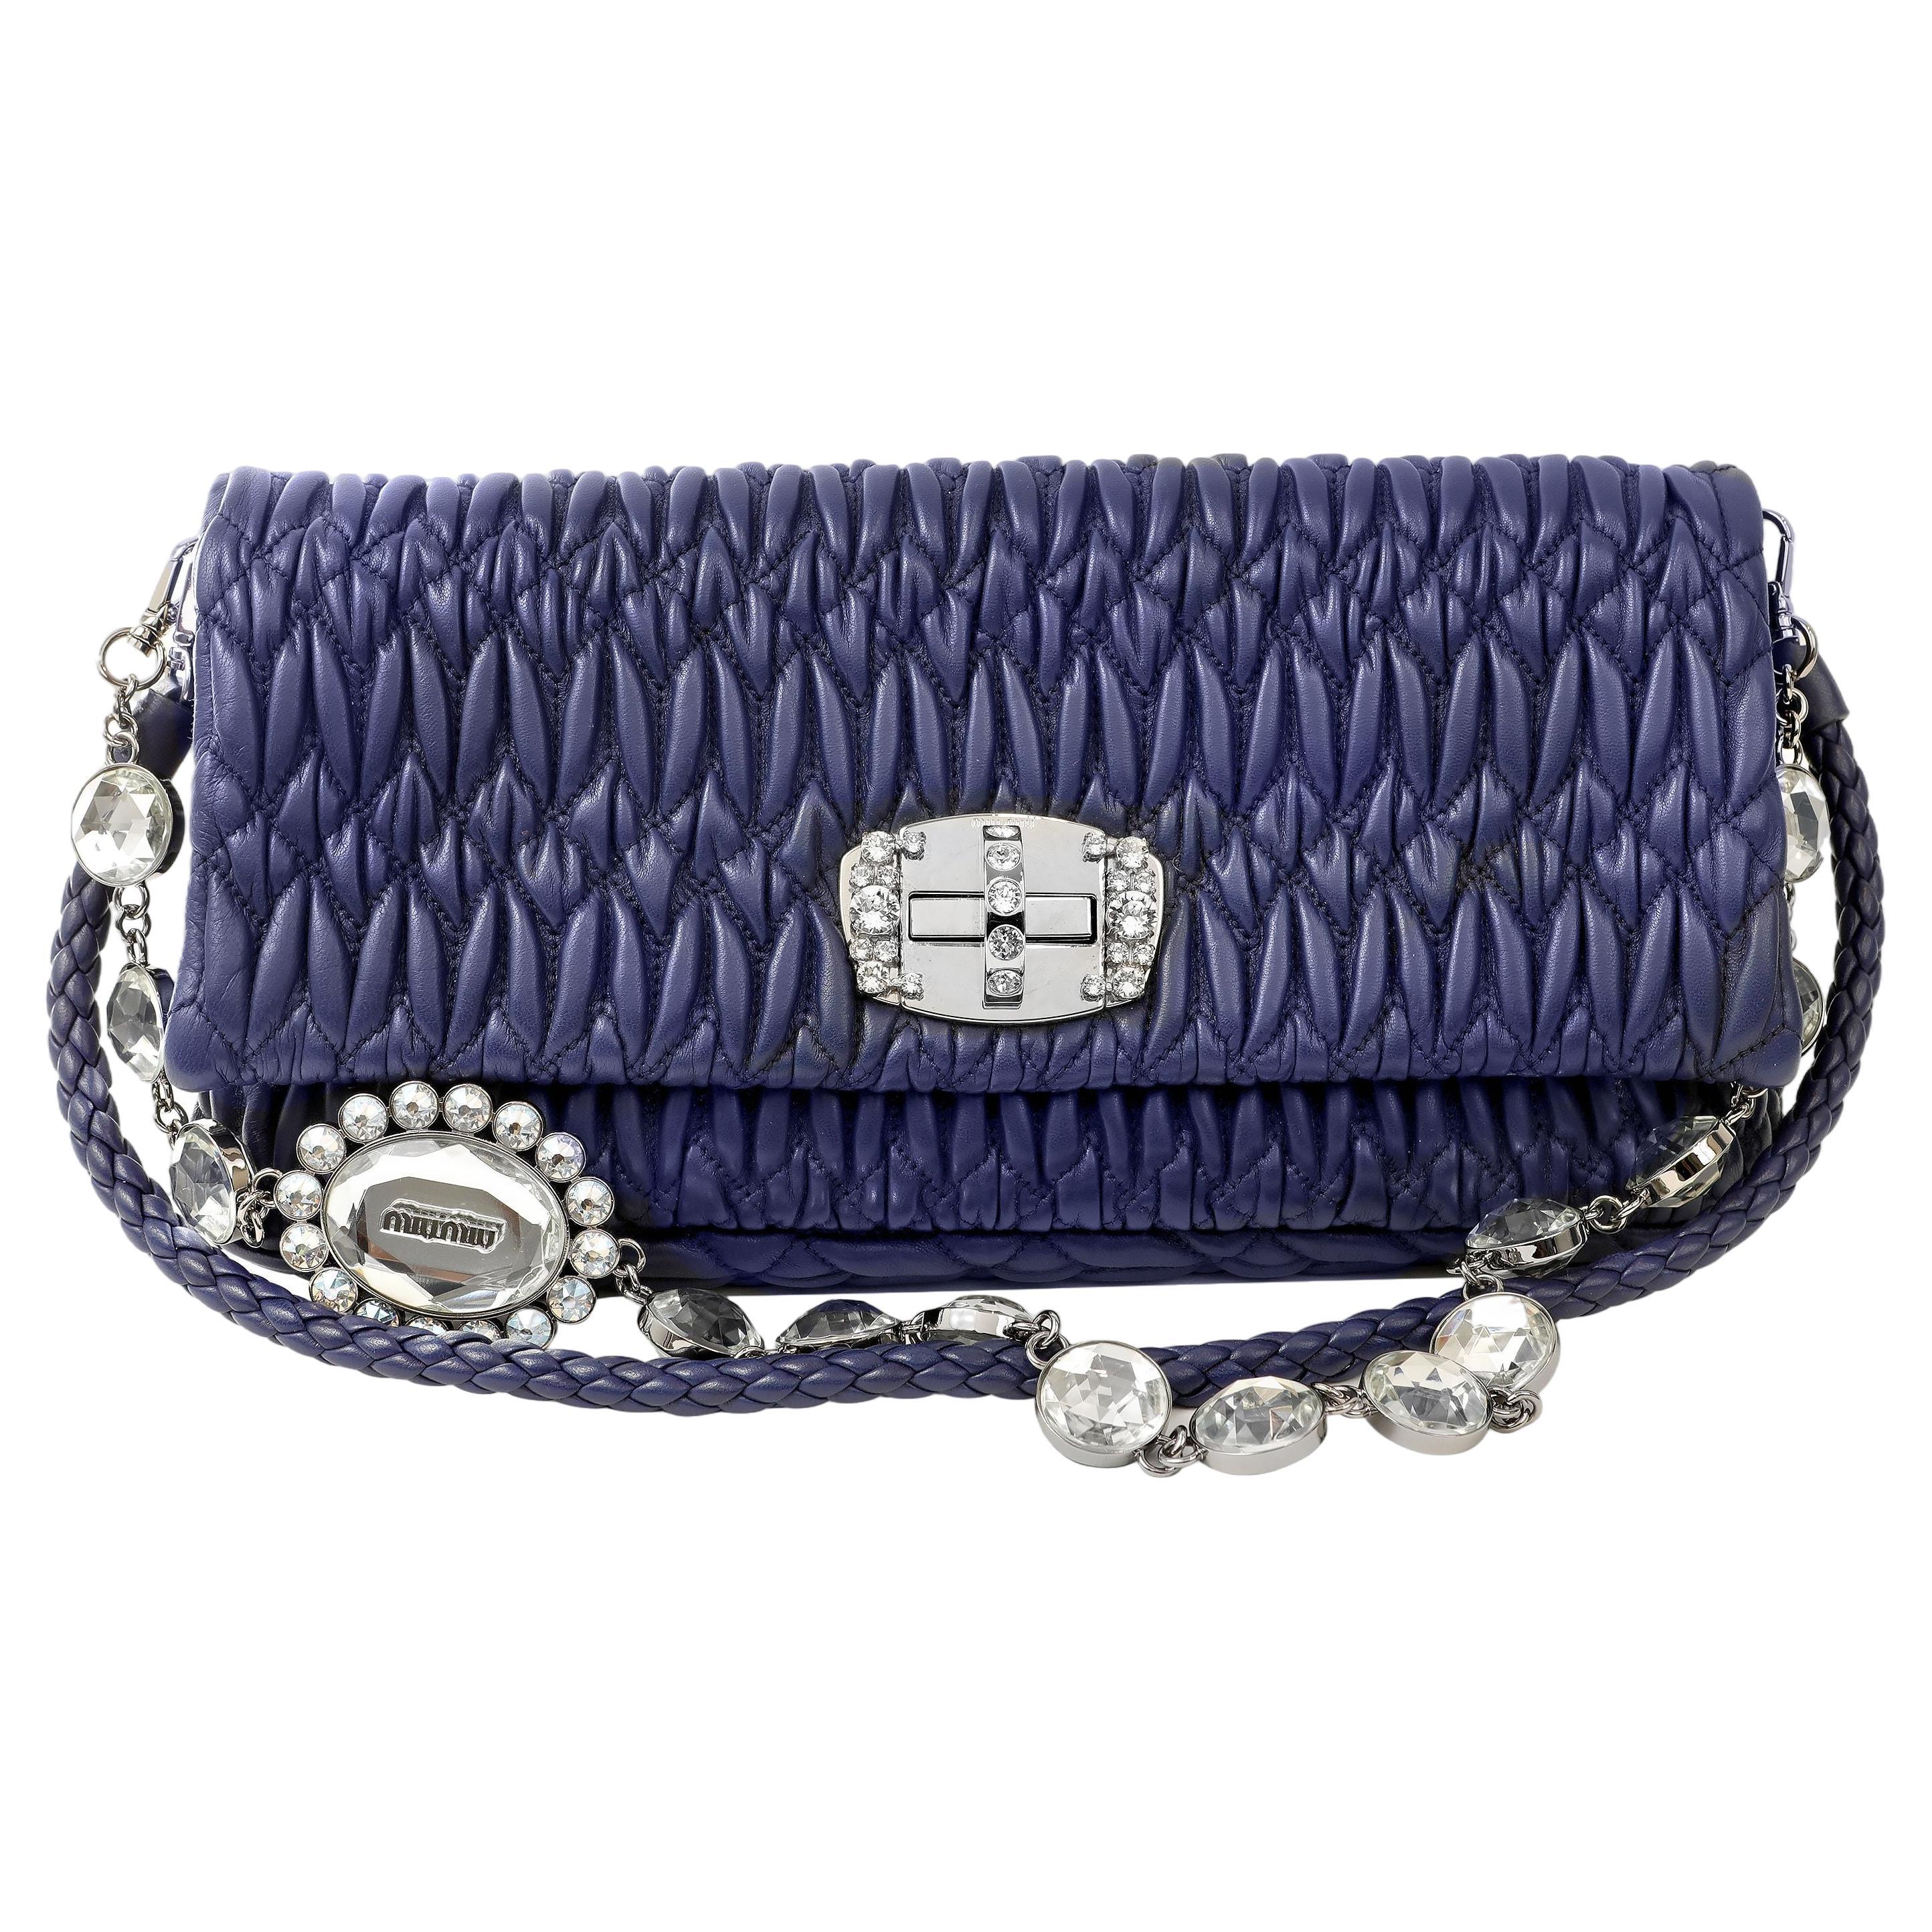 Miu Miu Royal Blue Iconic Crystal Cloquè Small Bag with Silver Hardware For Sale